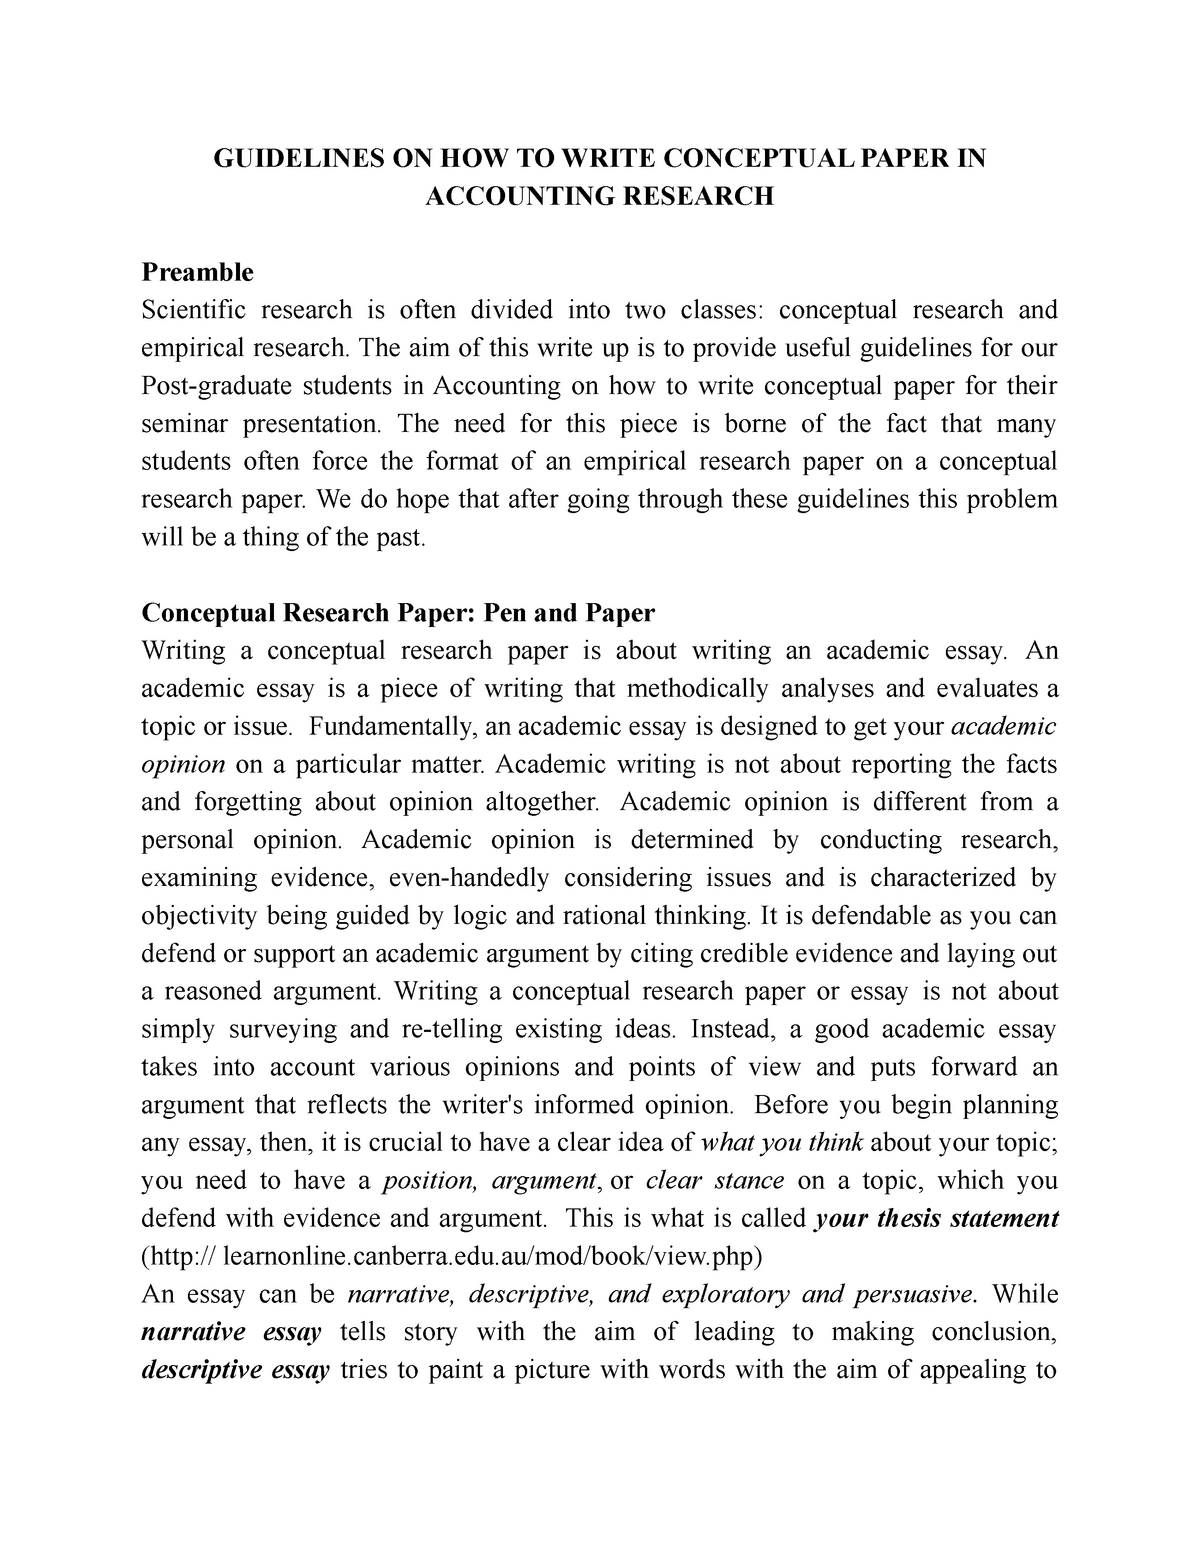 Summary - Guidelines on how to write conceptual paper in